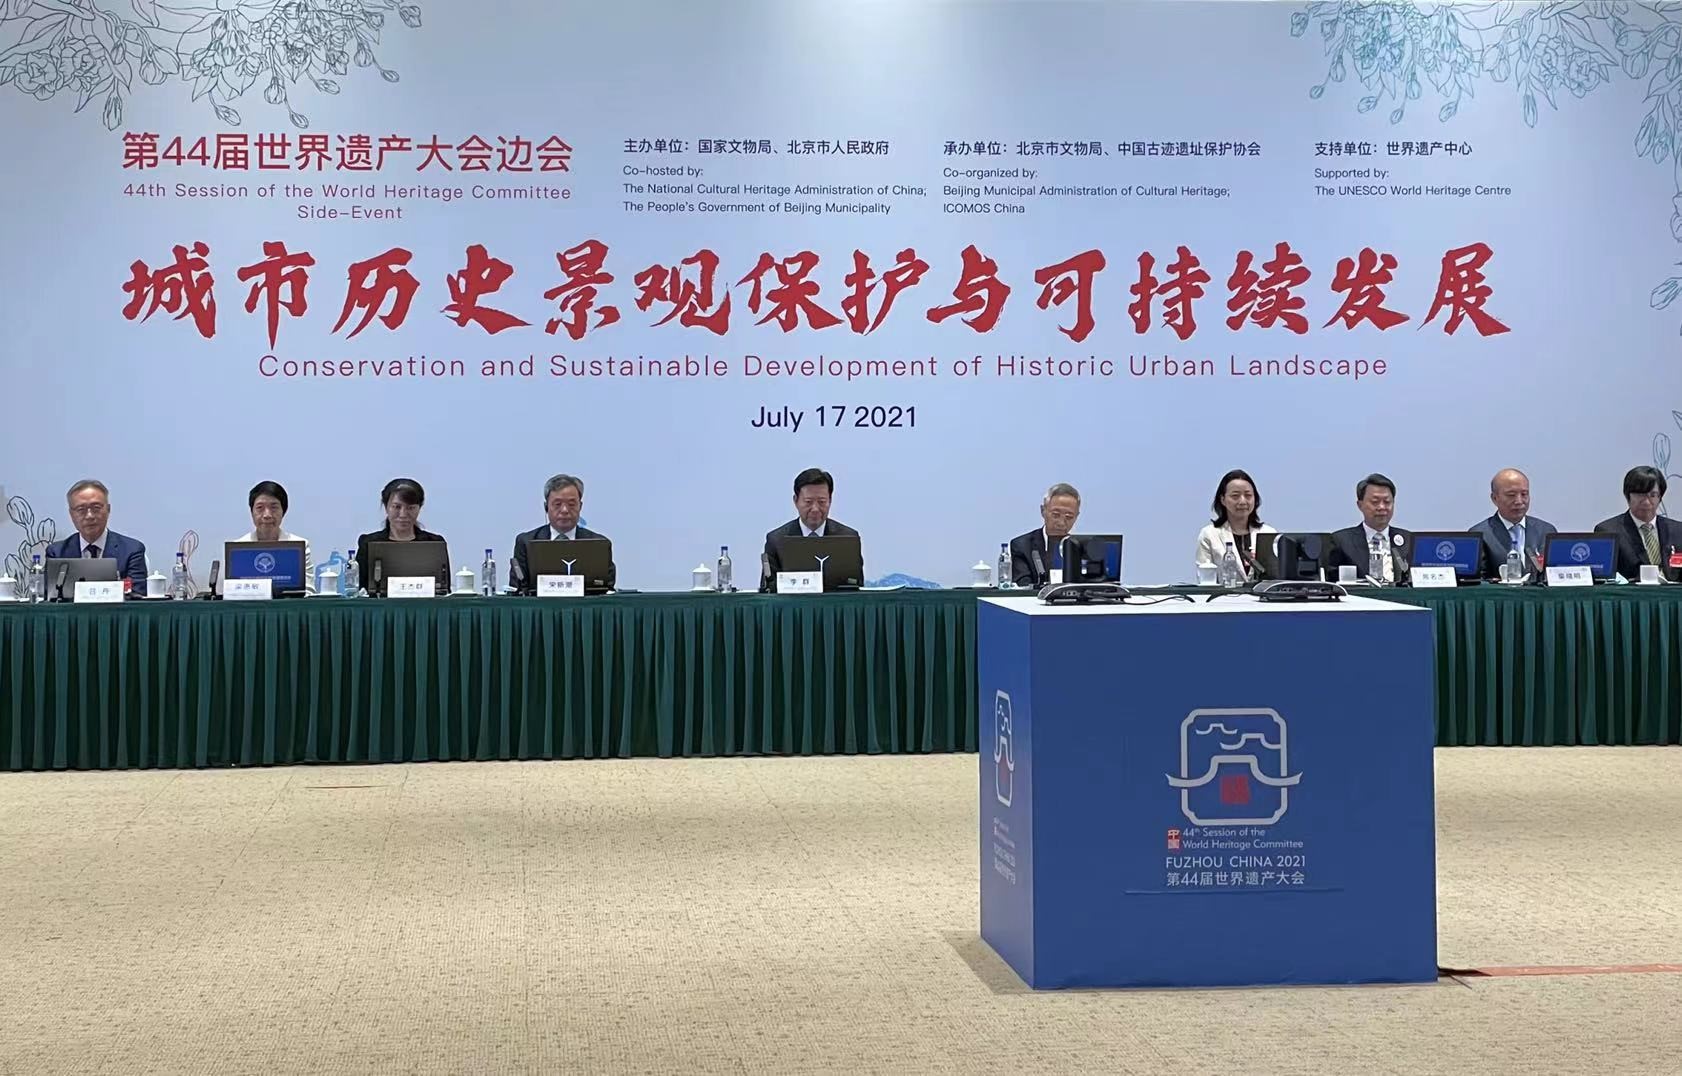 Side Event of the extended 44th session of the World Heritage Committee held to focus on the Central Axis of Beijing’s application for inscription to the World Heritage List 